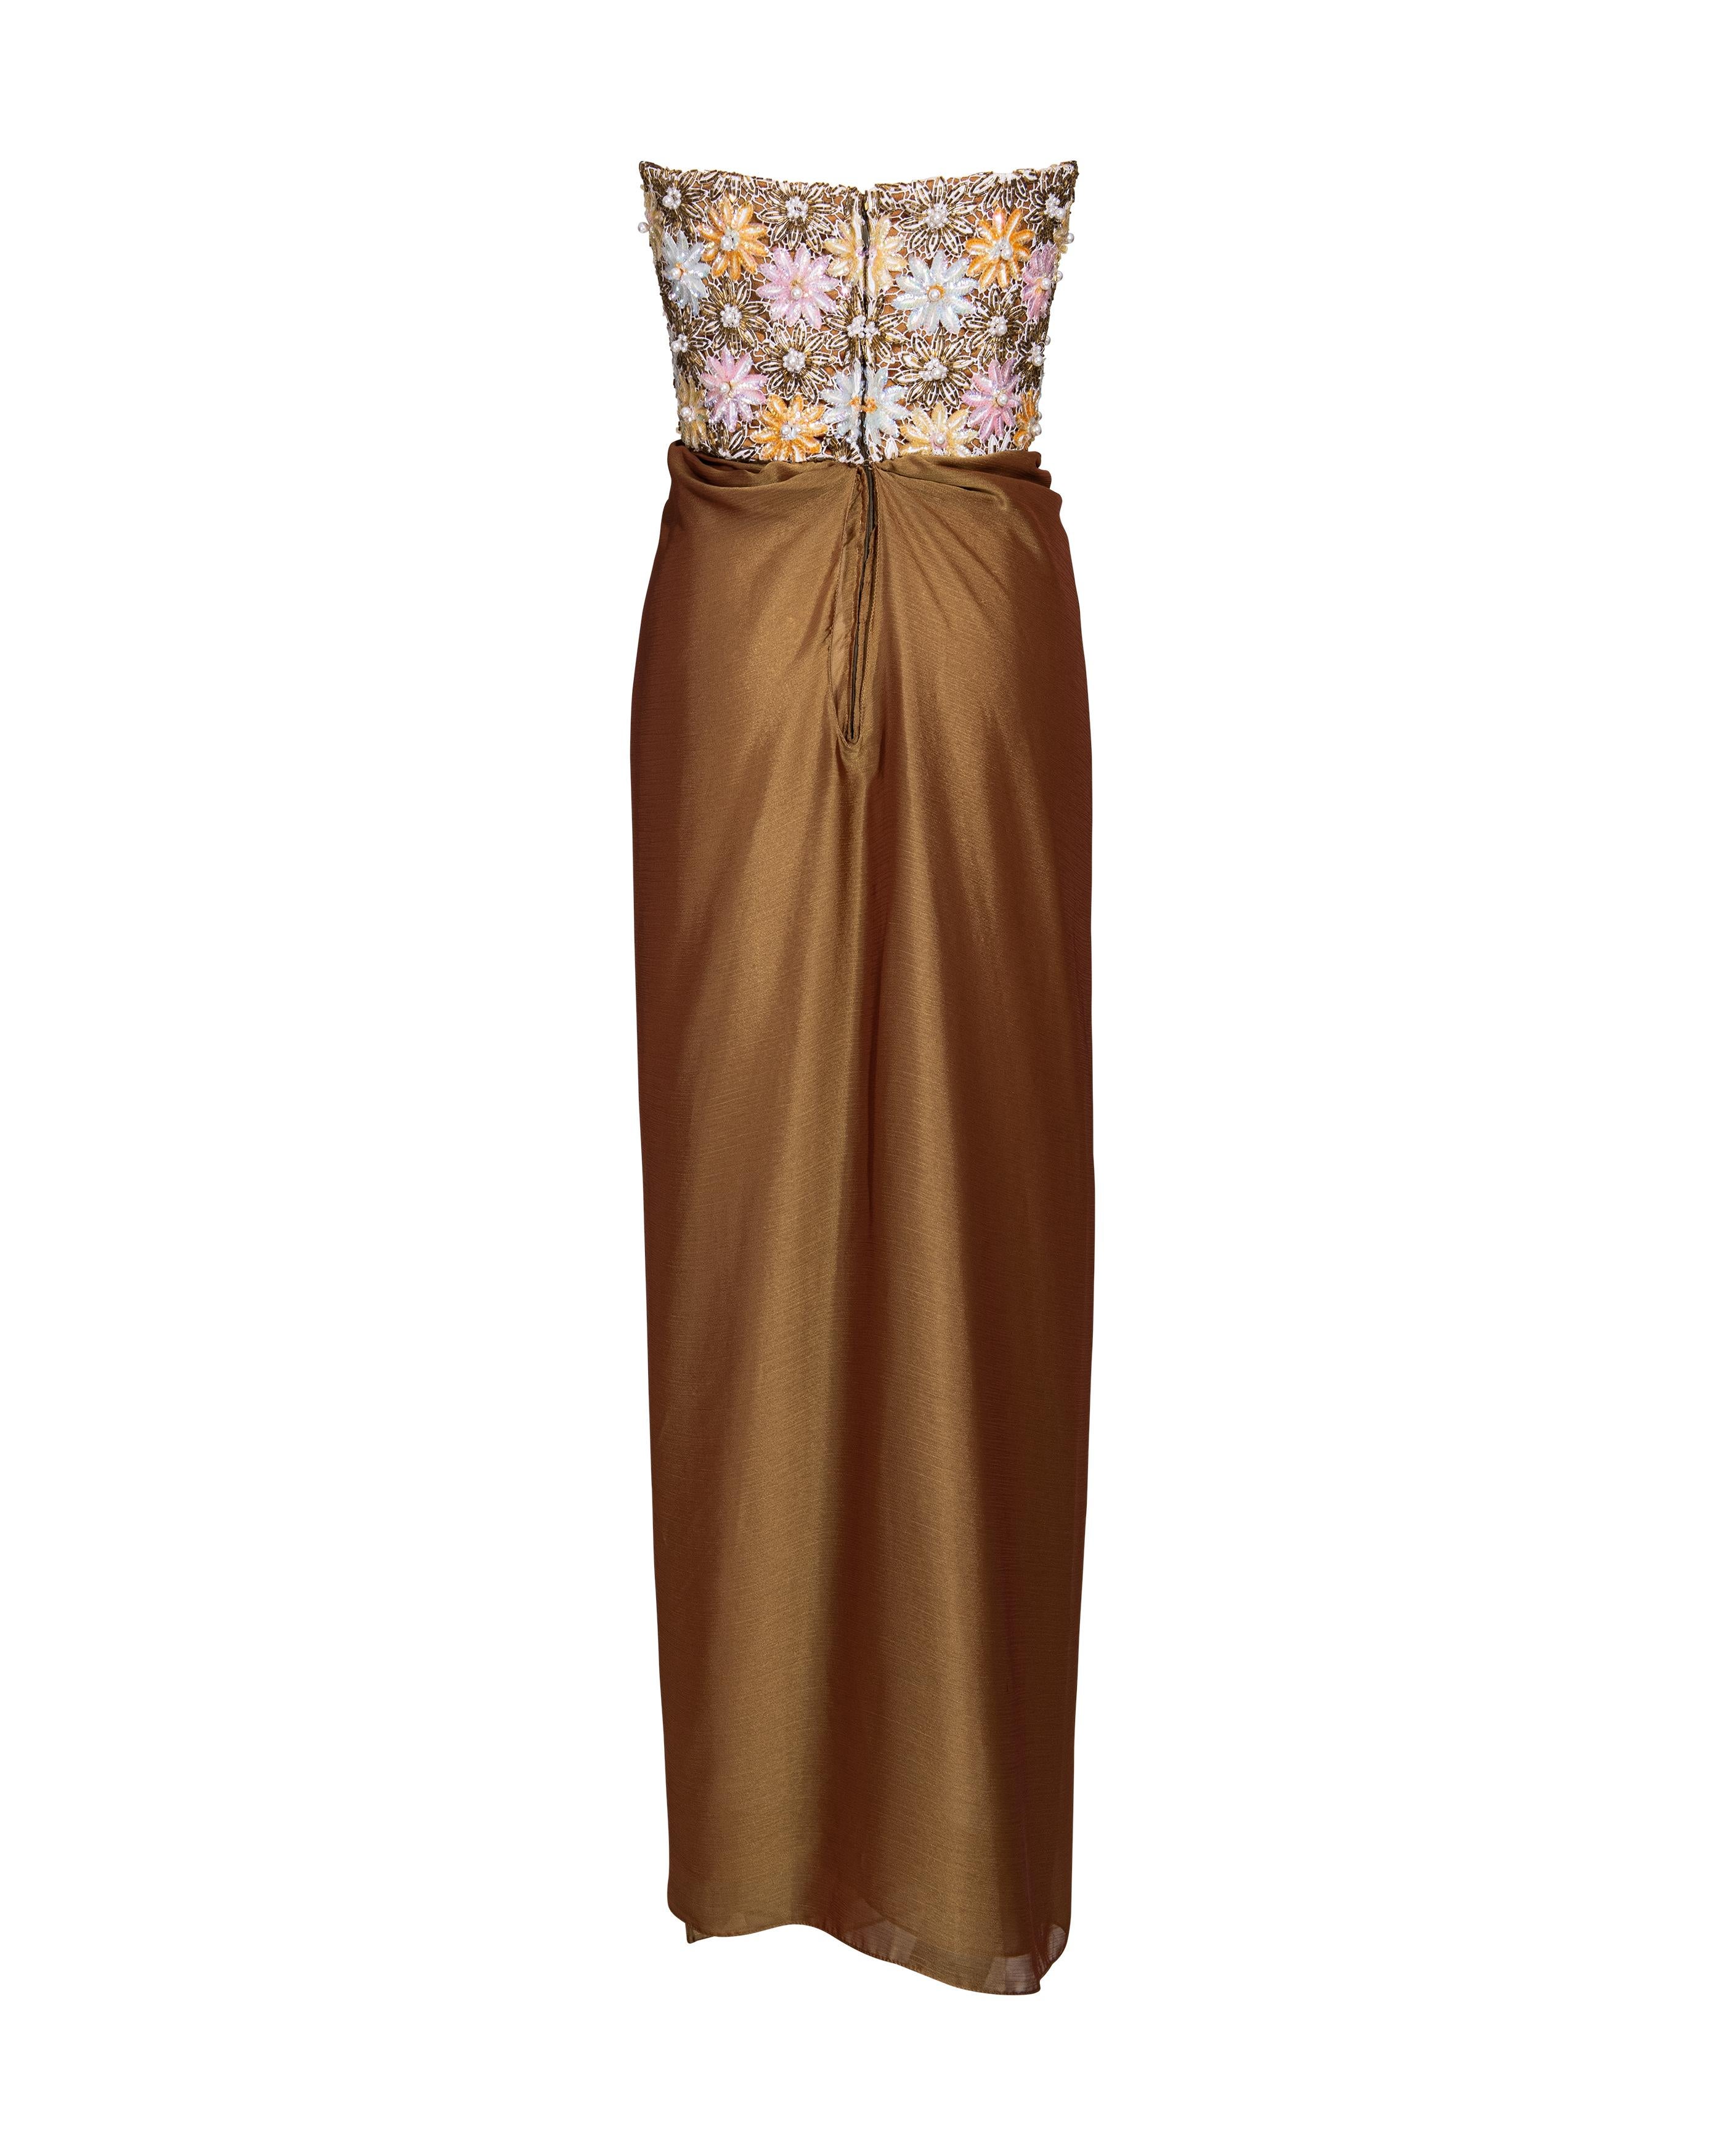 c. 1991 Nina Ricci Embellished Copper Strapless Gown with Stole 3